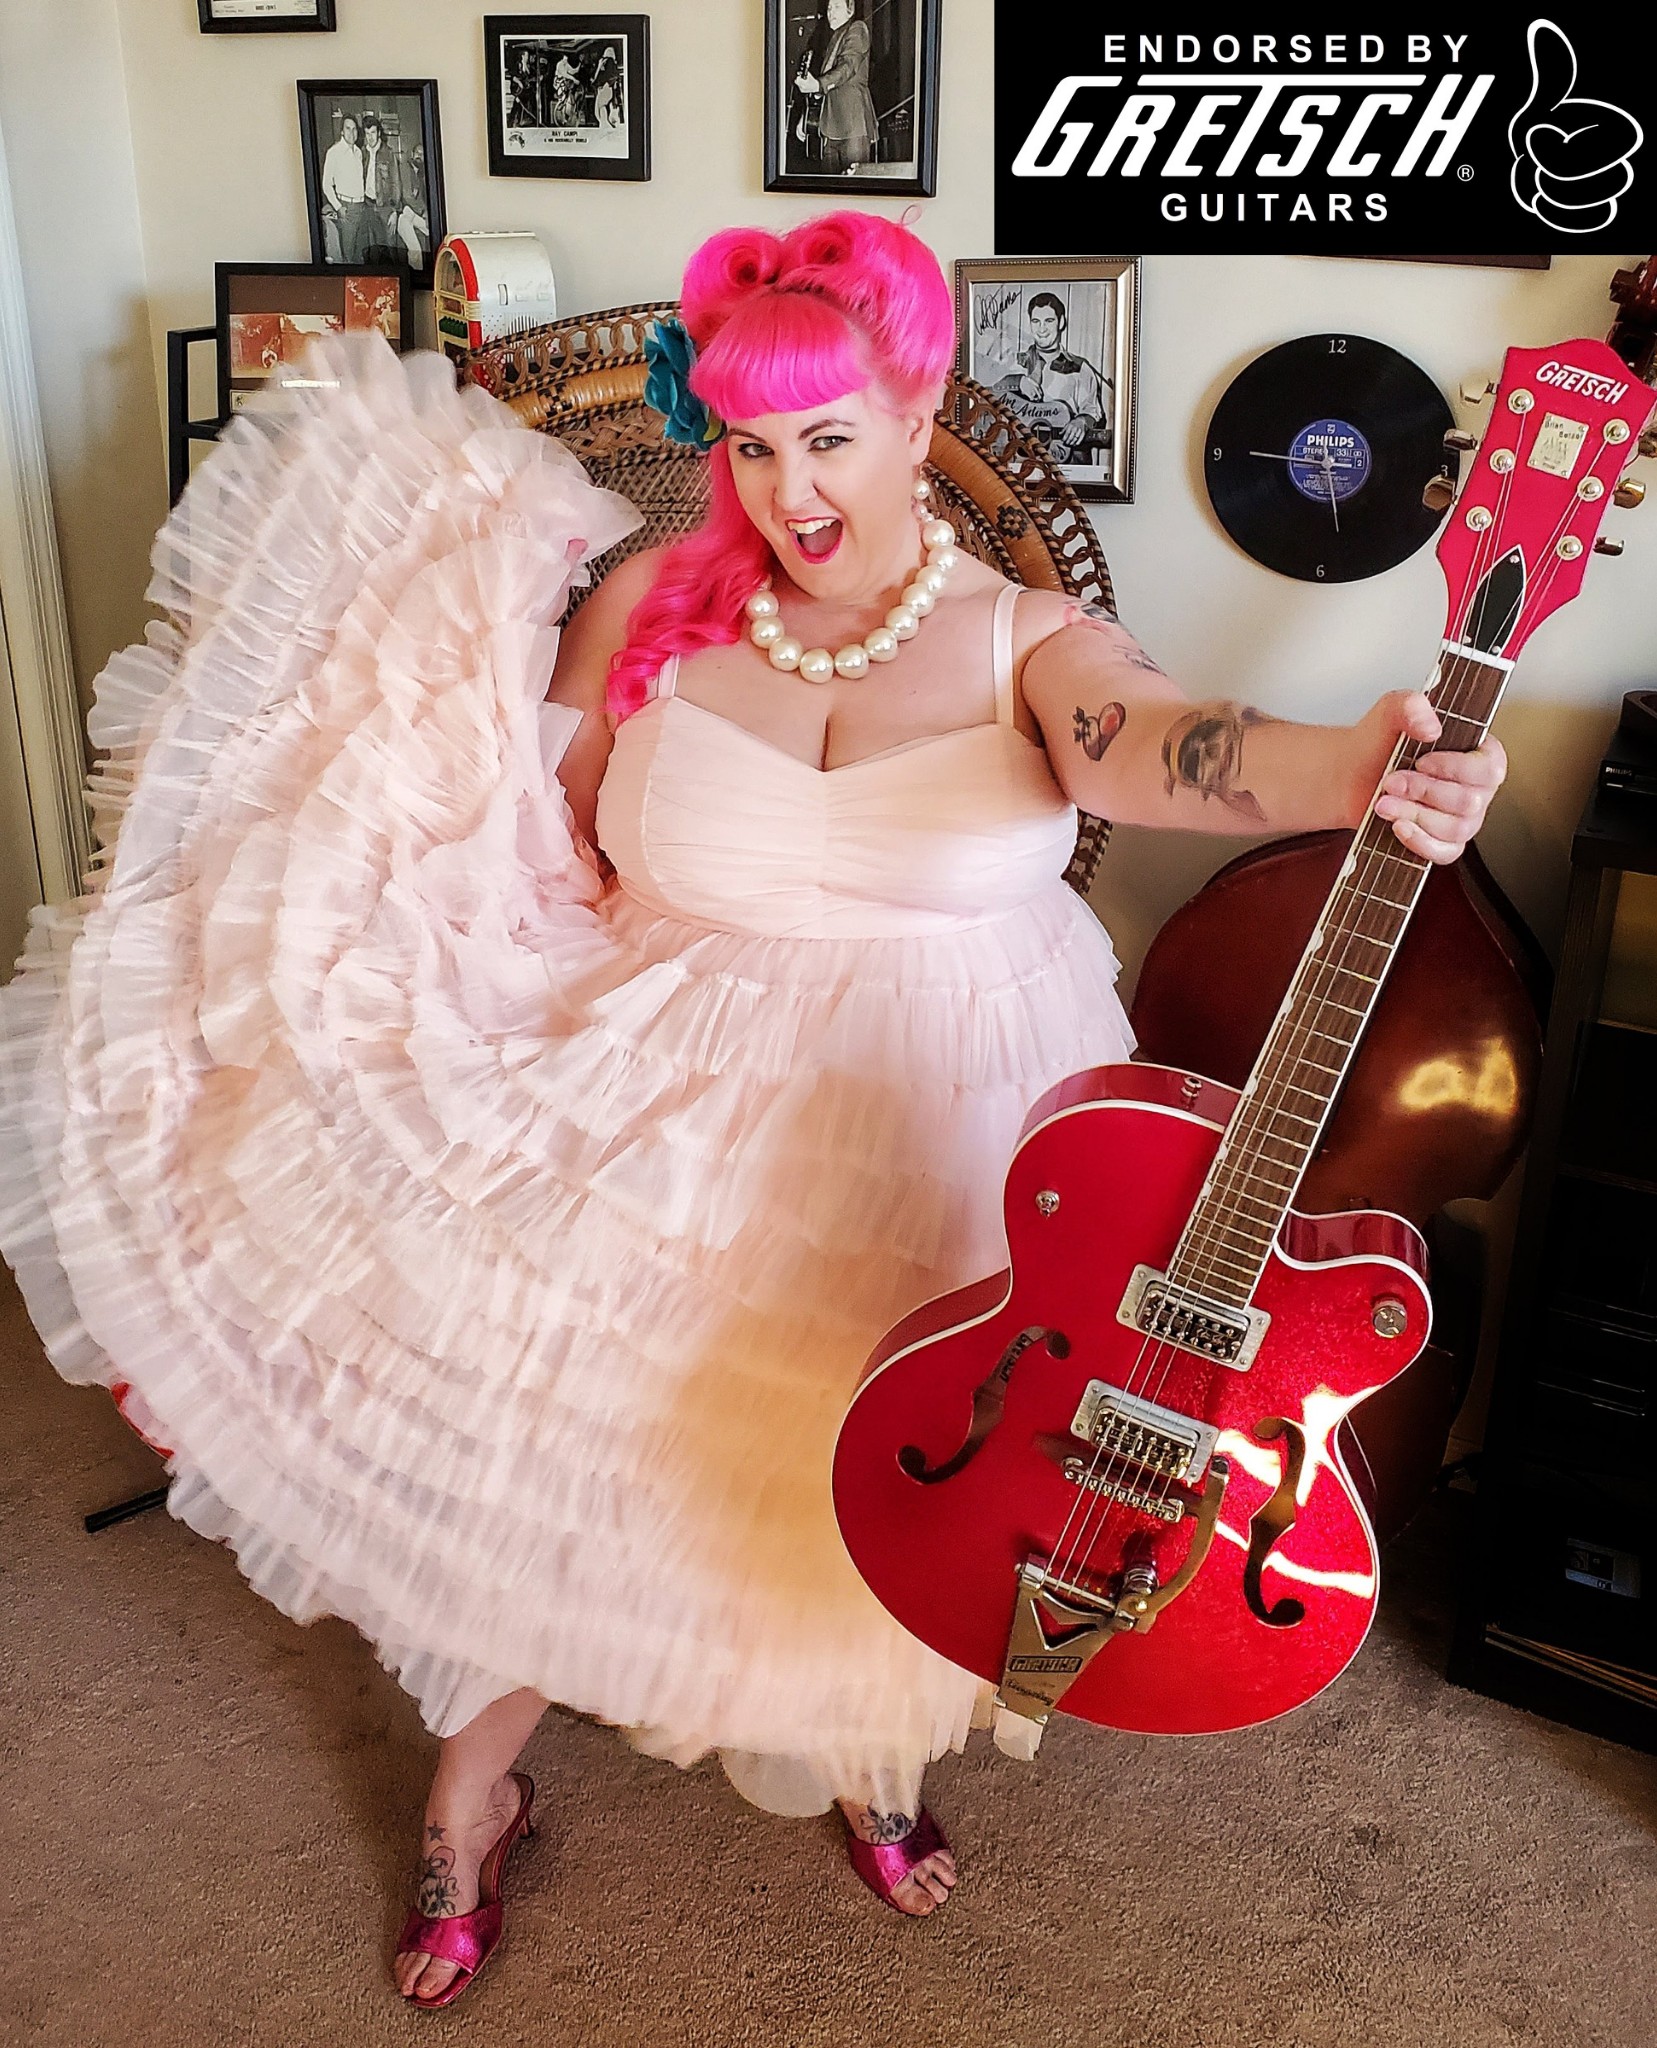 Jane Rose, endorsed by Gretsch